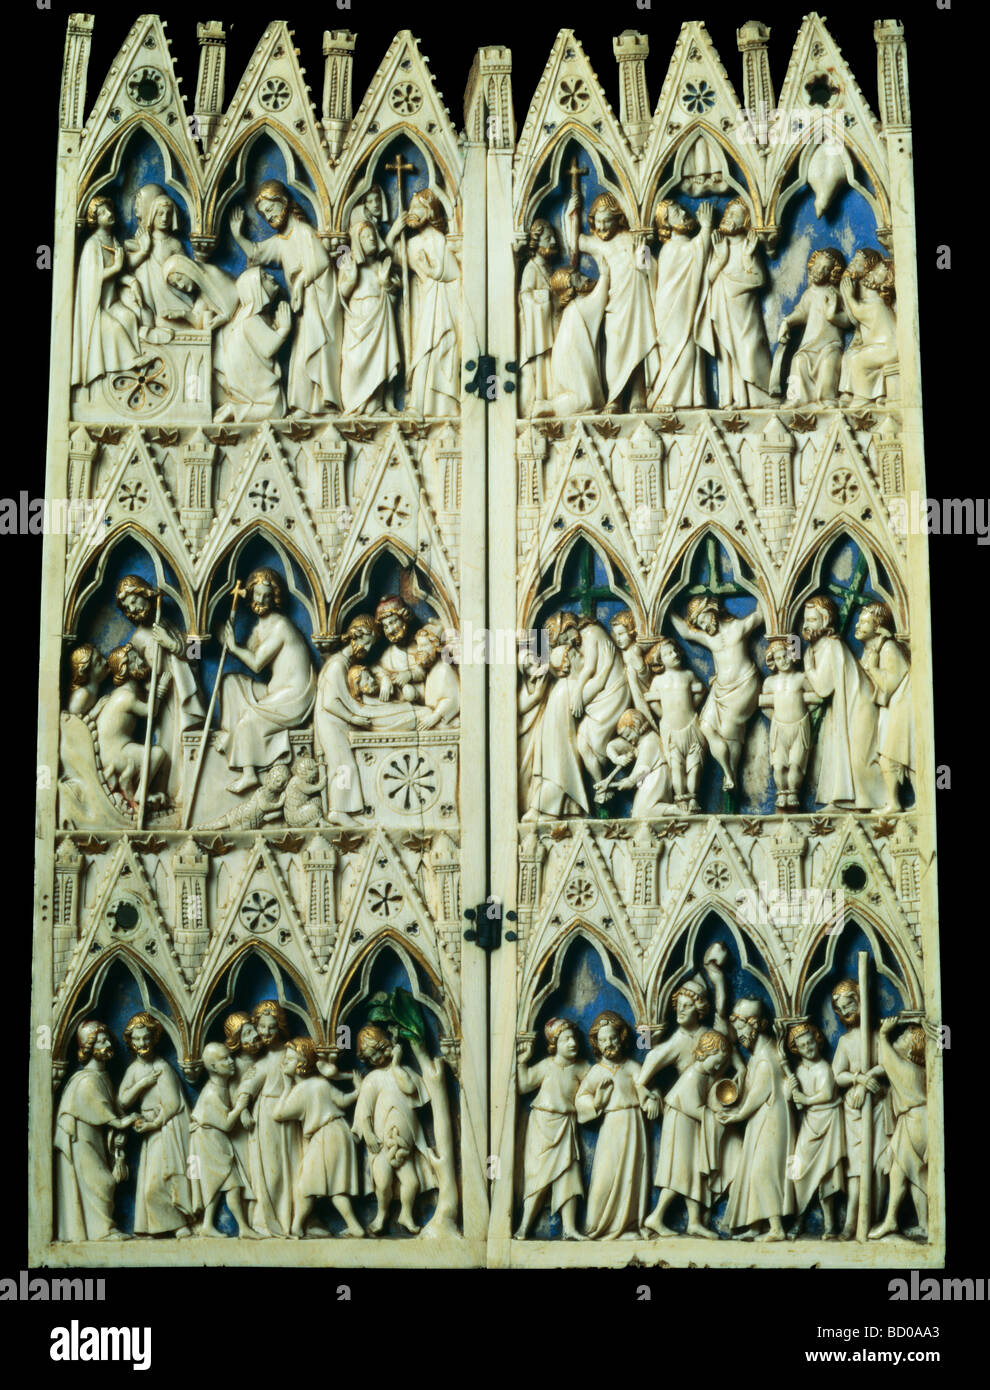 The Soissons Diptych. Paris, France, 13th-14th century Stock Photo